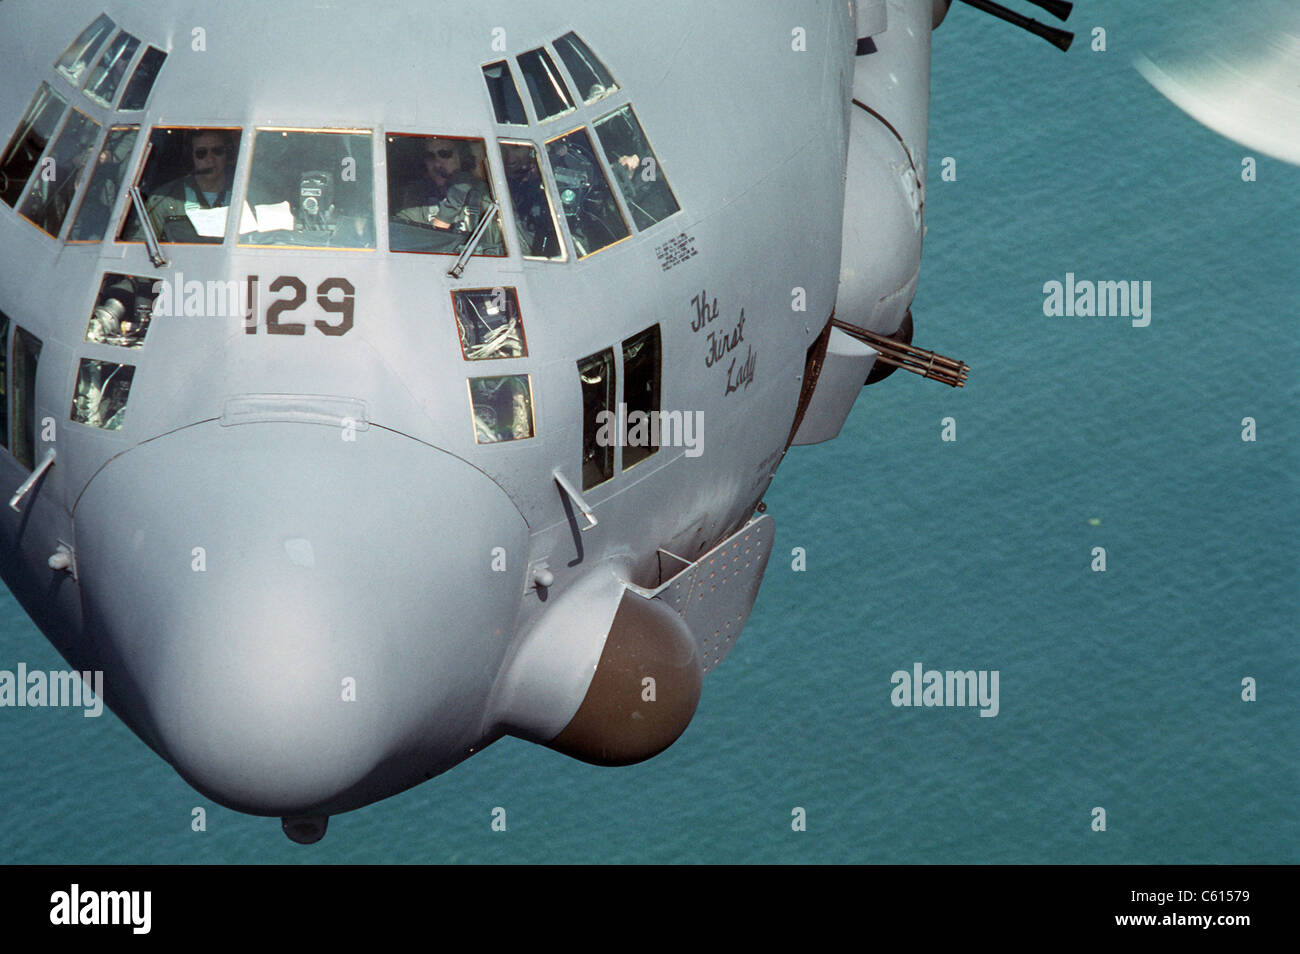 Close-up view of an C-130 Hercules gunship flying during Ronald Reagan's operations against Nicaragua's leftist government. Honduran and U.S. Army Special Forces conducted exercises discourage Nicaragua's raid into Honduras. Apr. 3 1987., Photo by:Everett Collection(BSLOC 2011 6 121) Stock Photo